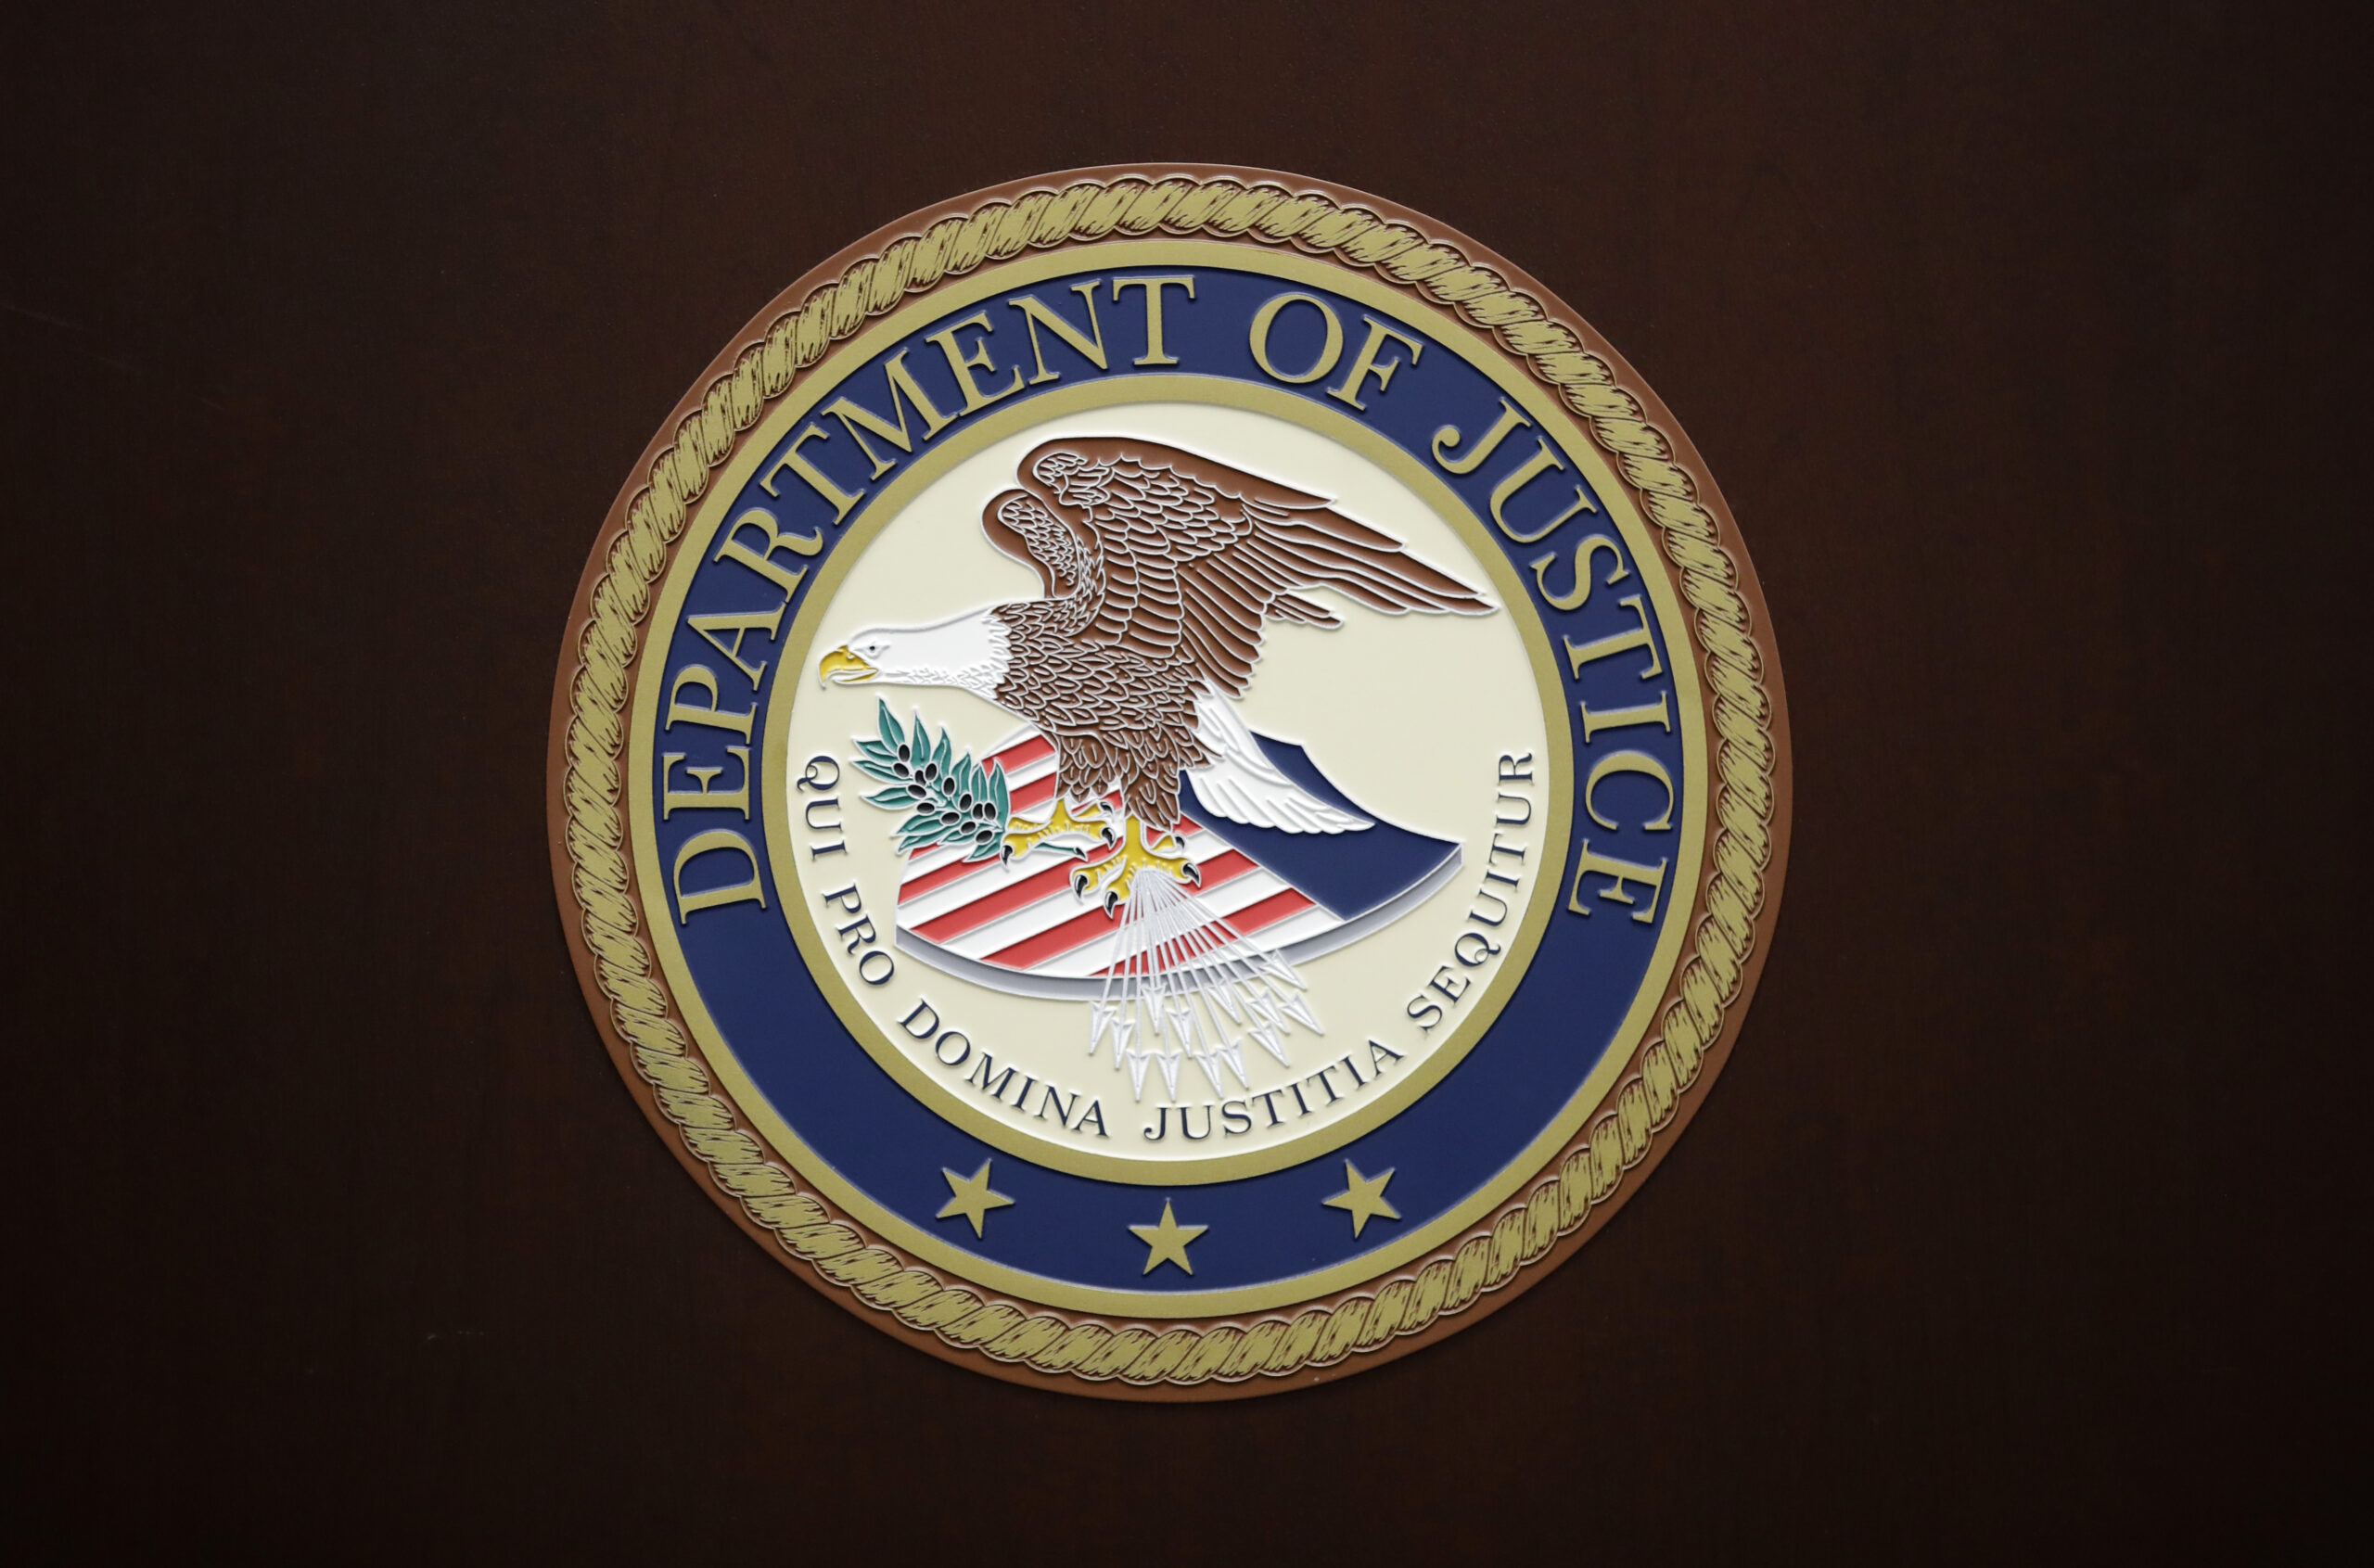 FILE - The U.S. Department of Justice logo is seen on a podium following a news conference in the office of the U.S. Attorney for the District of Maryland in Baltimore, March 1, 2017. On Thursday, Aug. 24, 2023, the U.S. Department of Justice filed suit against SpaceX, the rocket company founded and run by Elon Musk, for alleged hiring discrimination against refugees and people seeking or already granted asylum. (AP Photo/Patrick Semansky, File) American law enforcement announced that an international task force successfully took down “Qakbot,” a botnet malware platform controlled by foreign hackers.